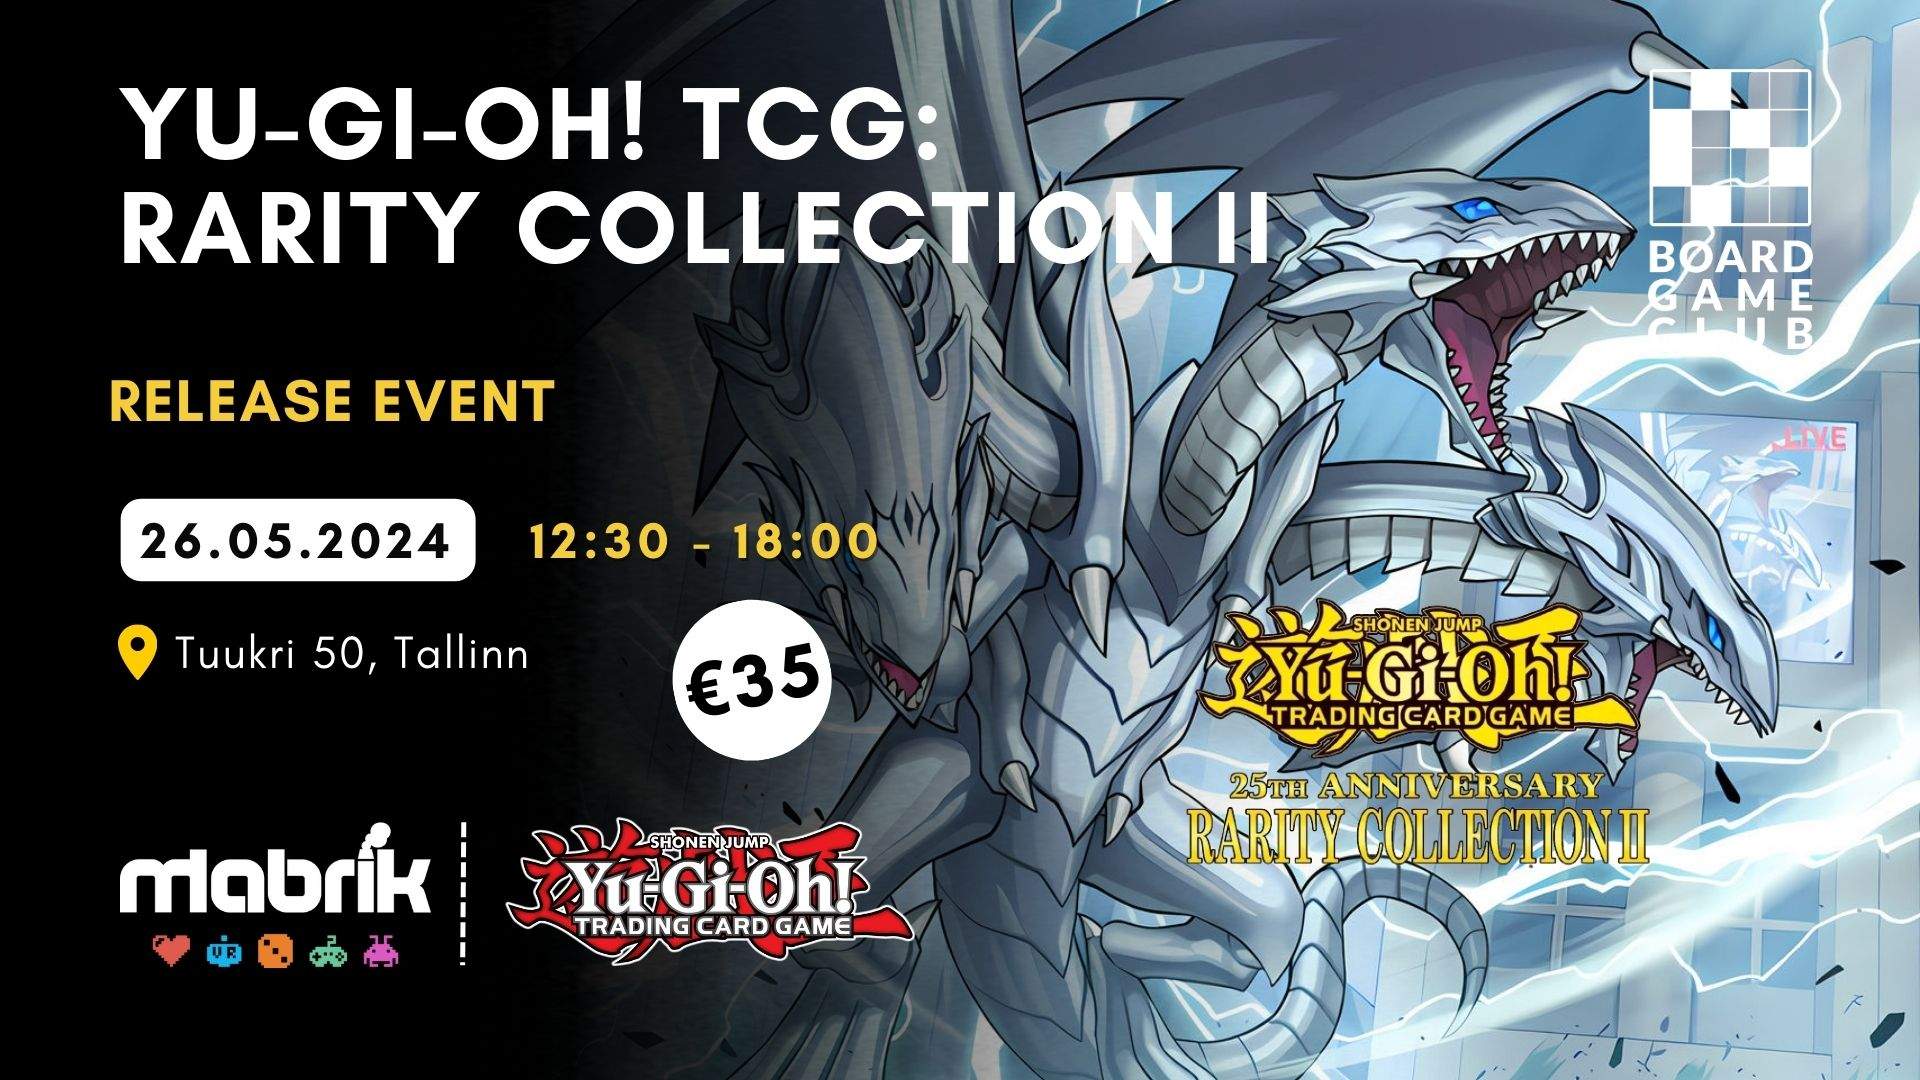 Events - 26.05.2024 - Yu-Gi-Oh! TCG: Rarity Collection II - Pre-Release